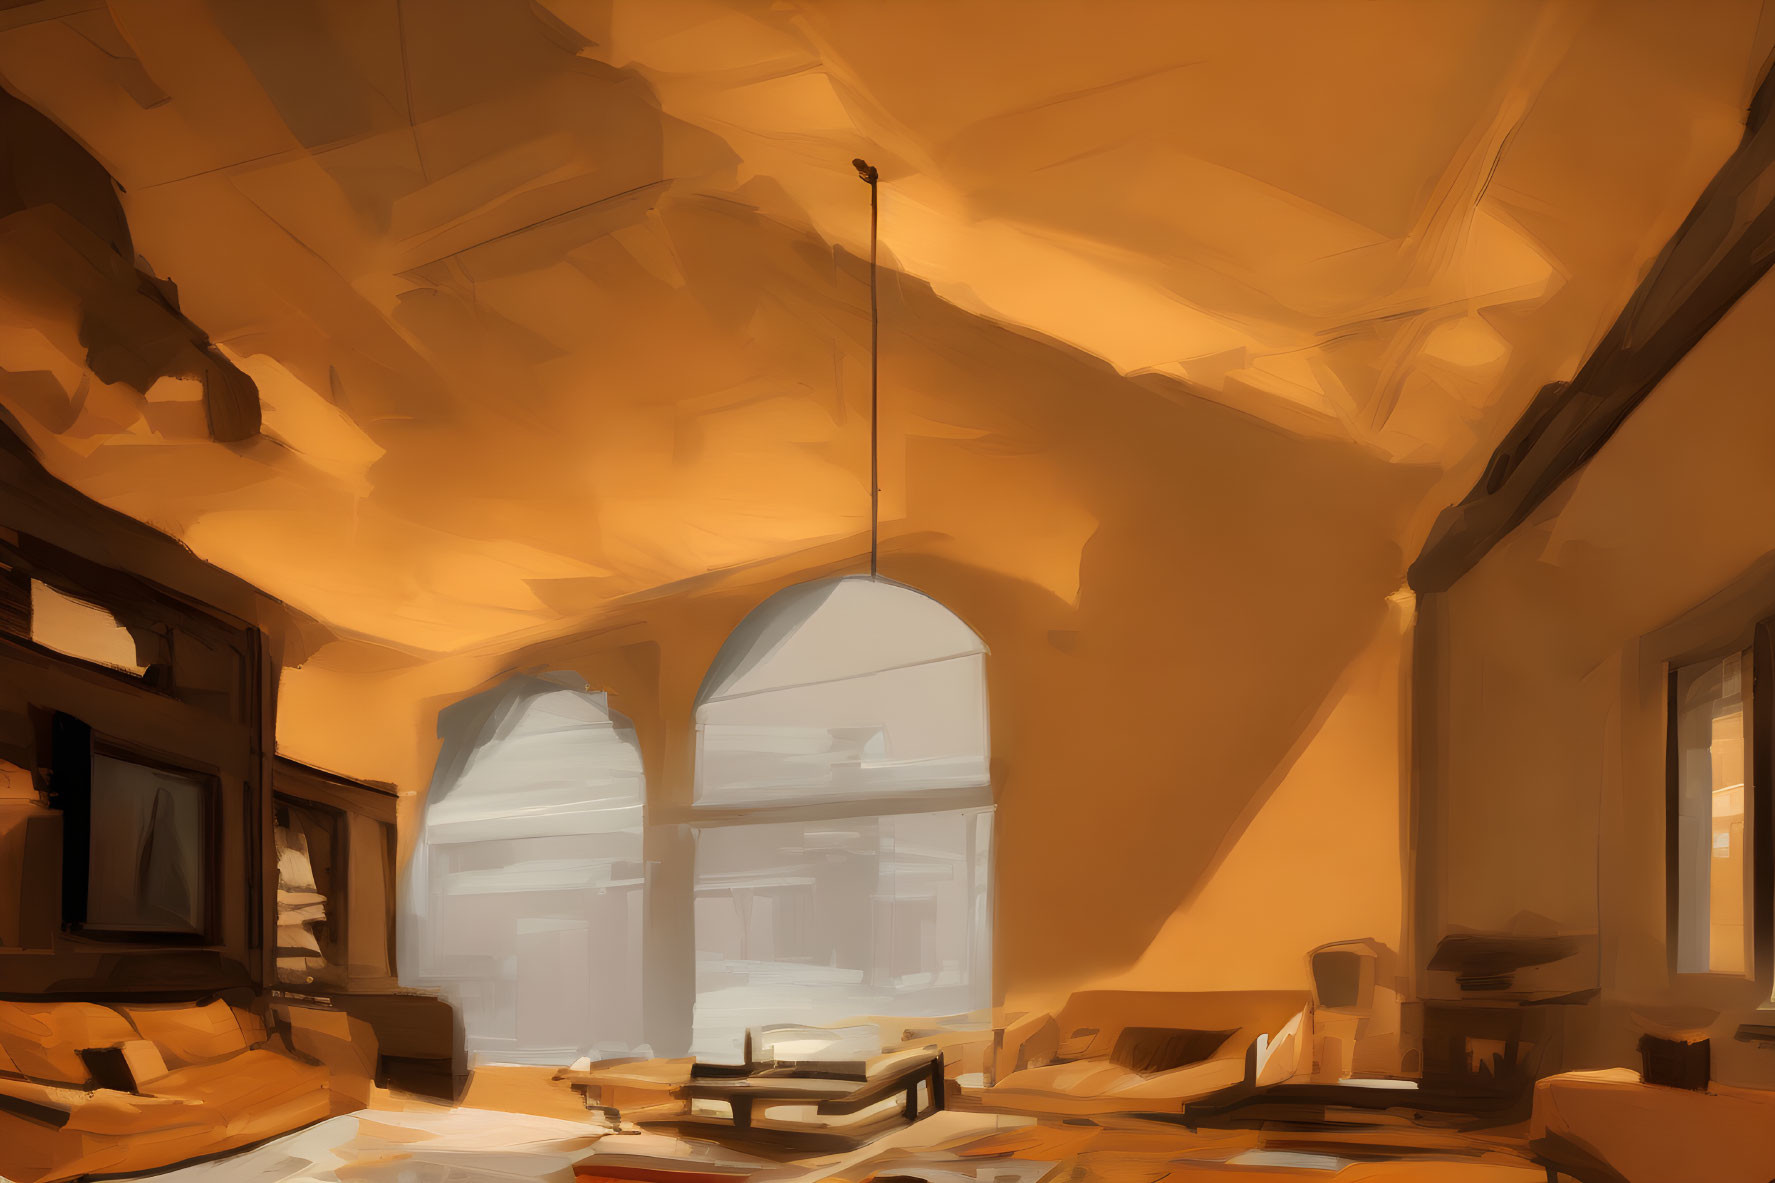 Impressionistic indoor scene with arch windows, scattered papers, and furniture outlines